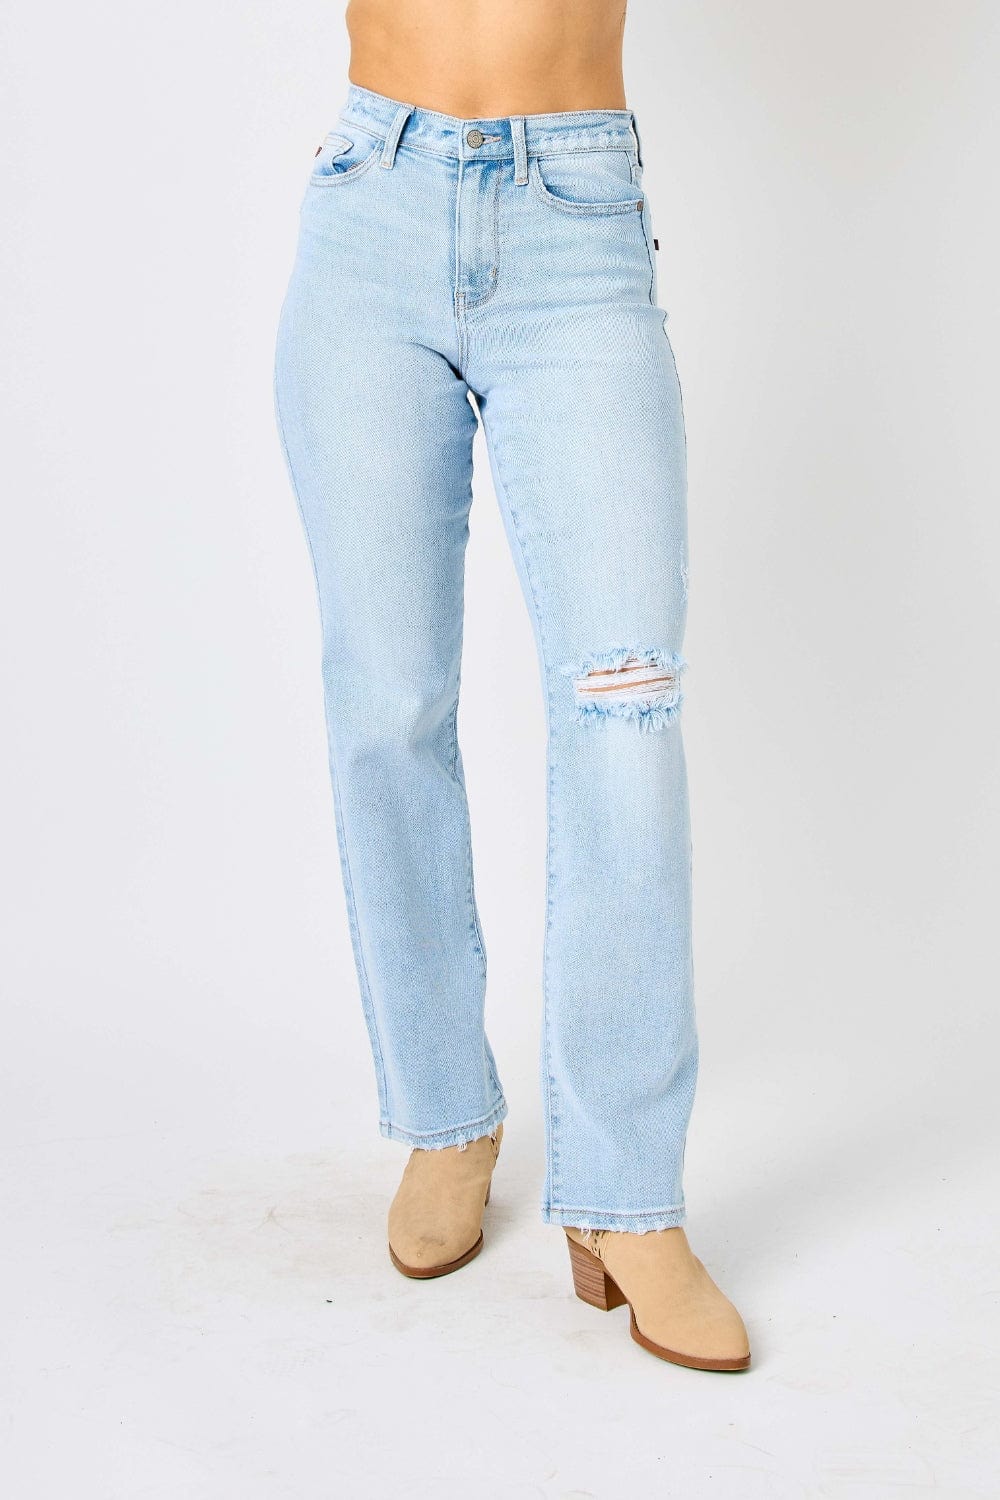 The802Gypsy Bottoms/Jeans Light / 0(24) ❤️GYPSY-Judy Blue- High Waist Distressed Straight Jeans